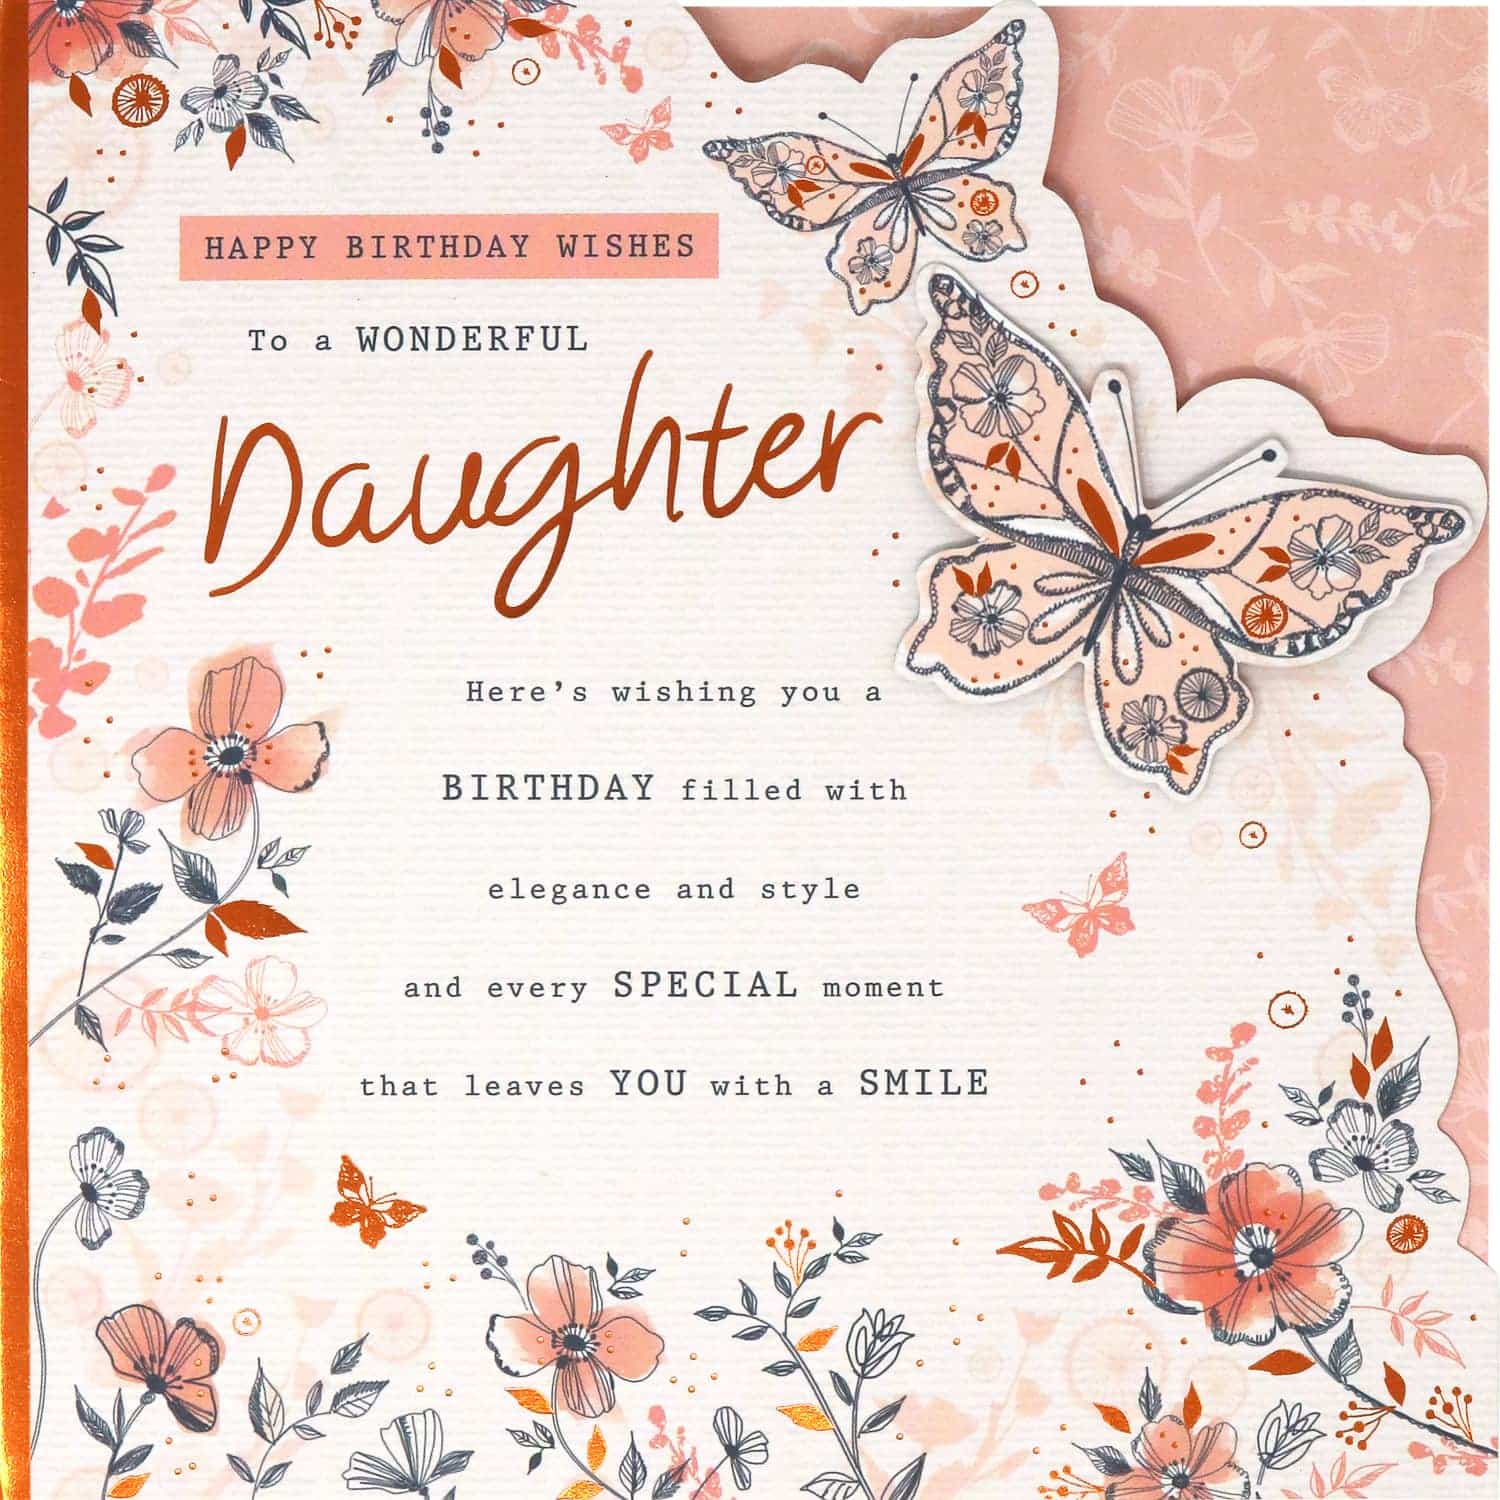 What Is A Daughter Birthday Card